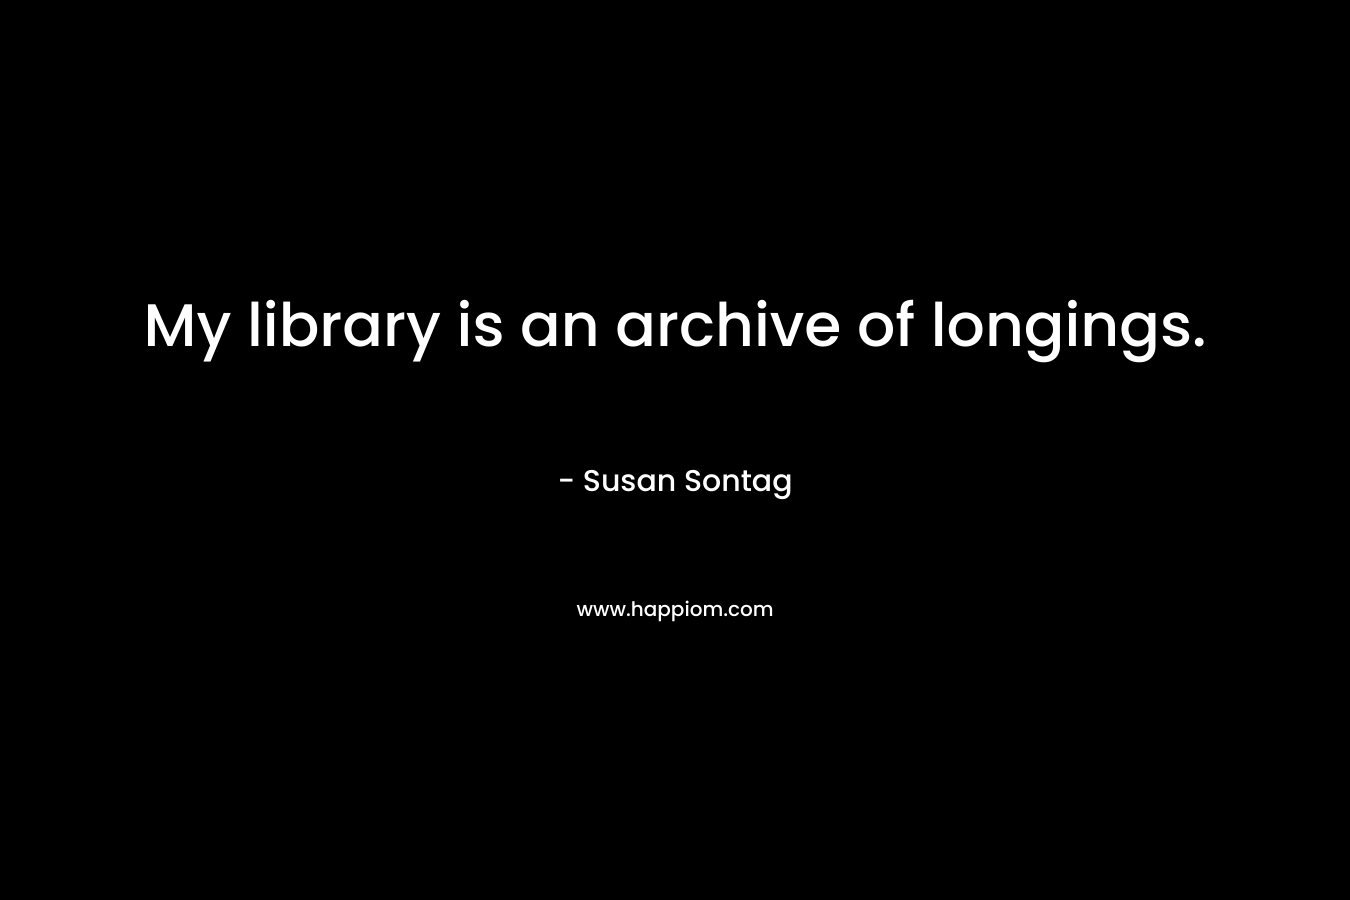 My library is an archive of longings.